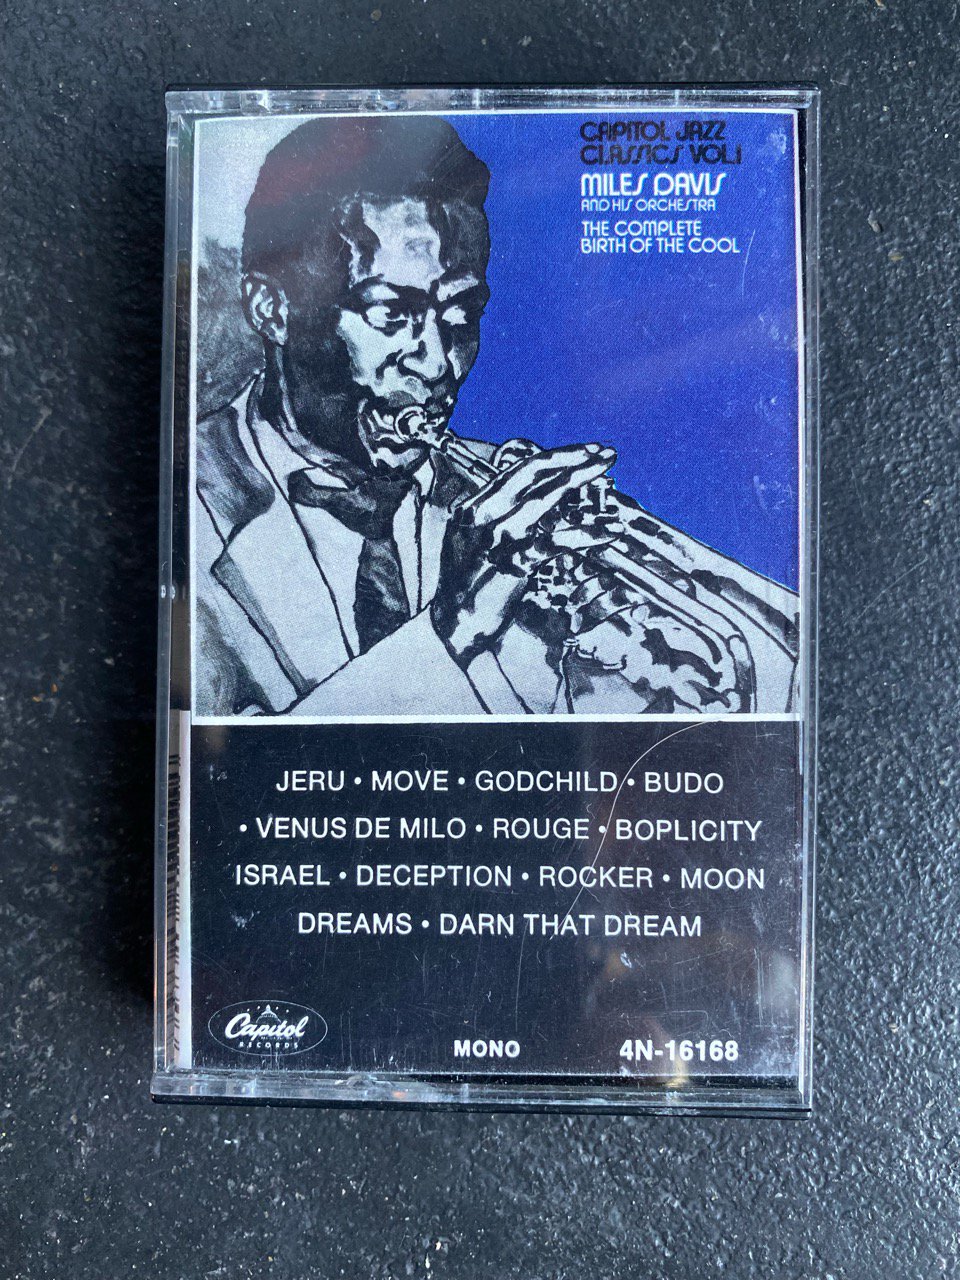 Miles Davis /  CAPITOL JAZZ CLASSICS ・VOL.1 / THE COMPLETE BIRTH OF THE COOL 